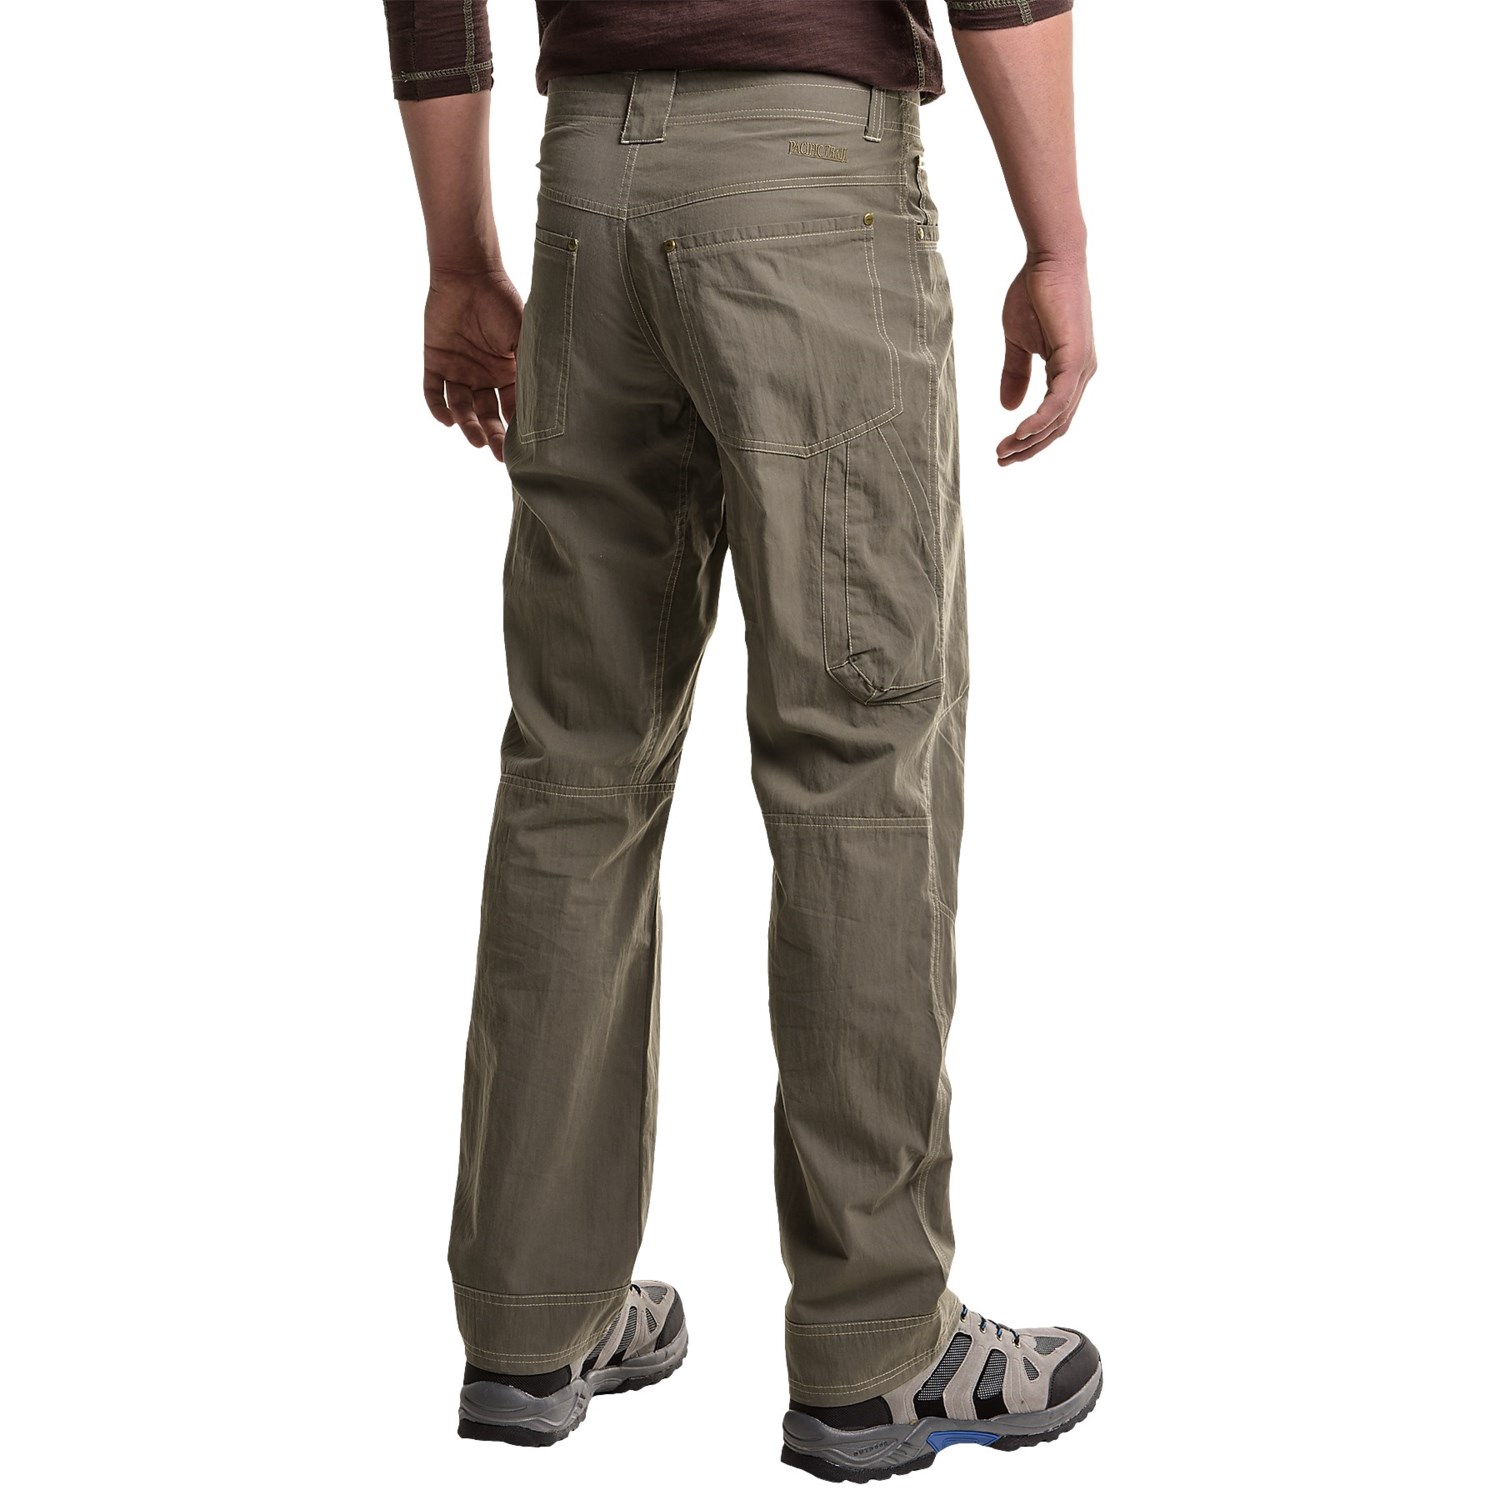 Pacific Trail Field Pants (For Men) - Save 50%